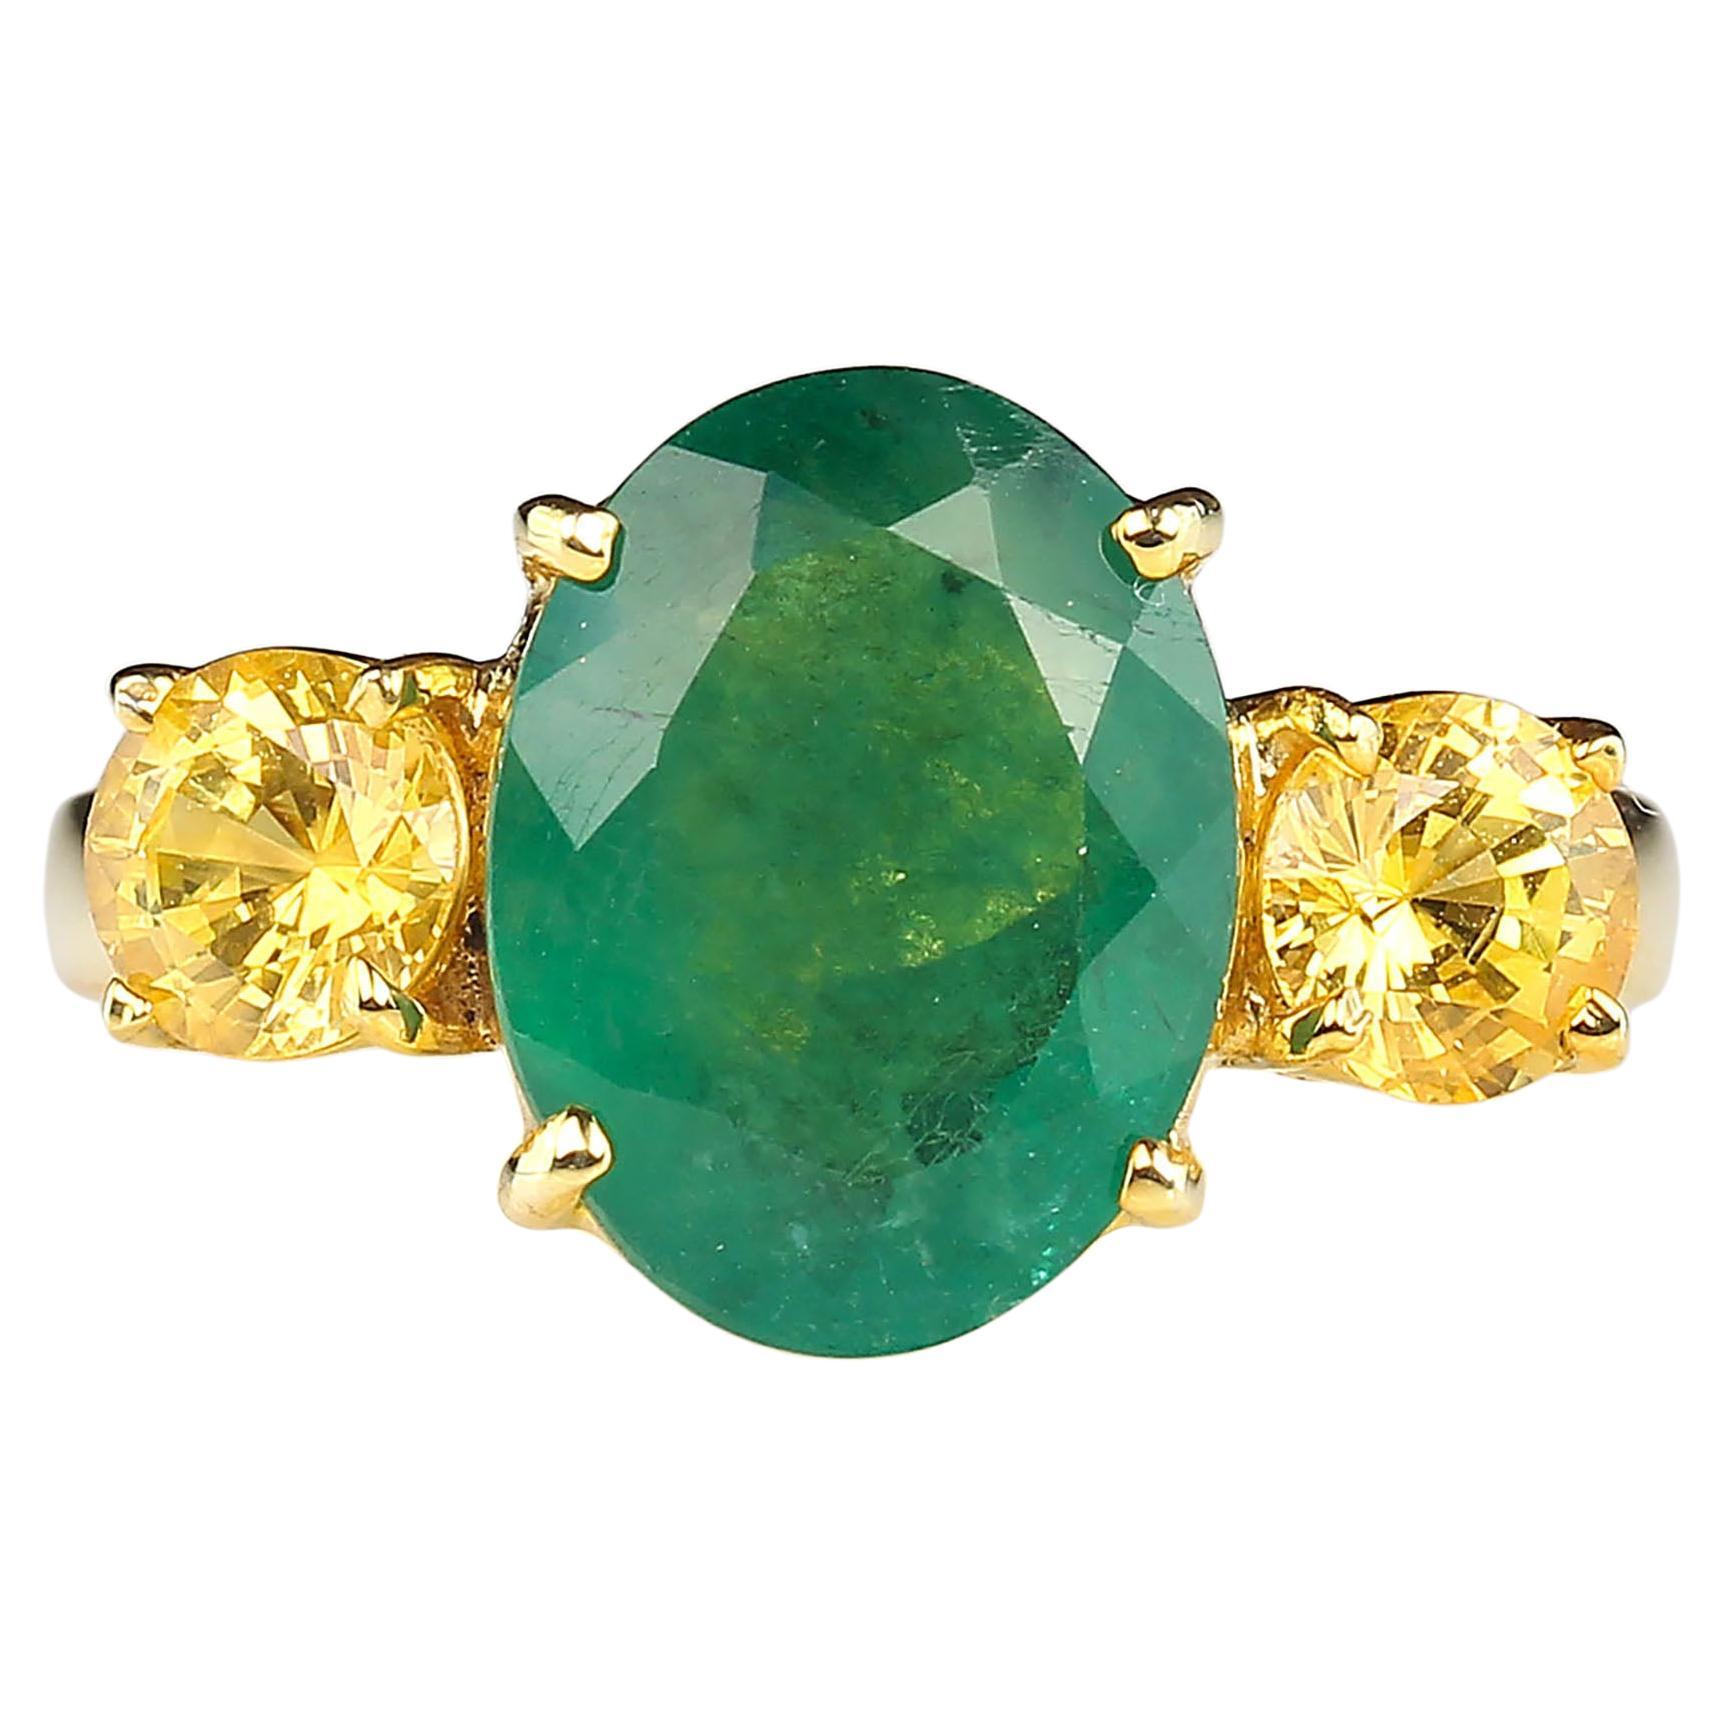 Striking dinner ring of large 3.11 carat oval Emerald accented with sparkling round golden Citrines, 1.3 carats total weigh. This setting is gold rhodium over Sterling Silver and a nice weight and width to balance the size of the gemstones.